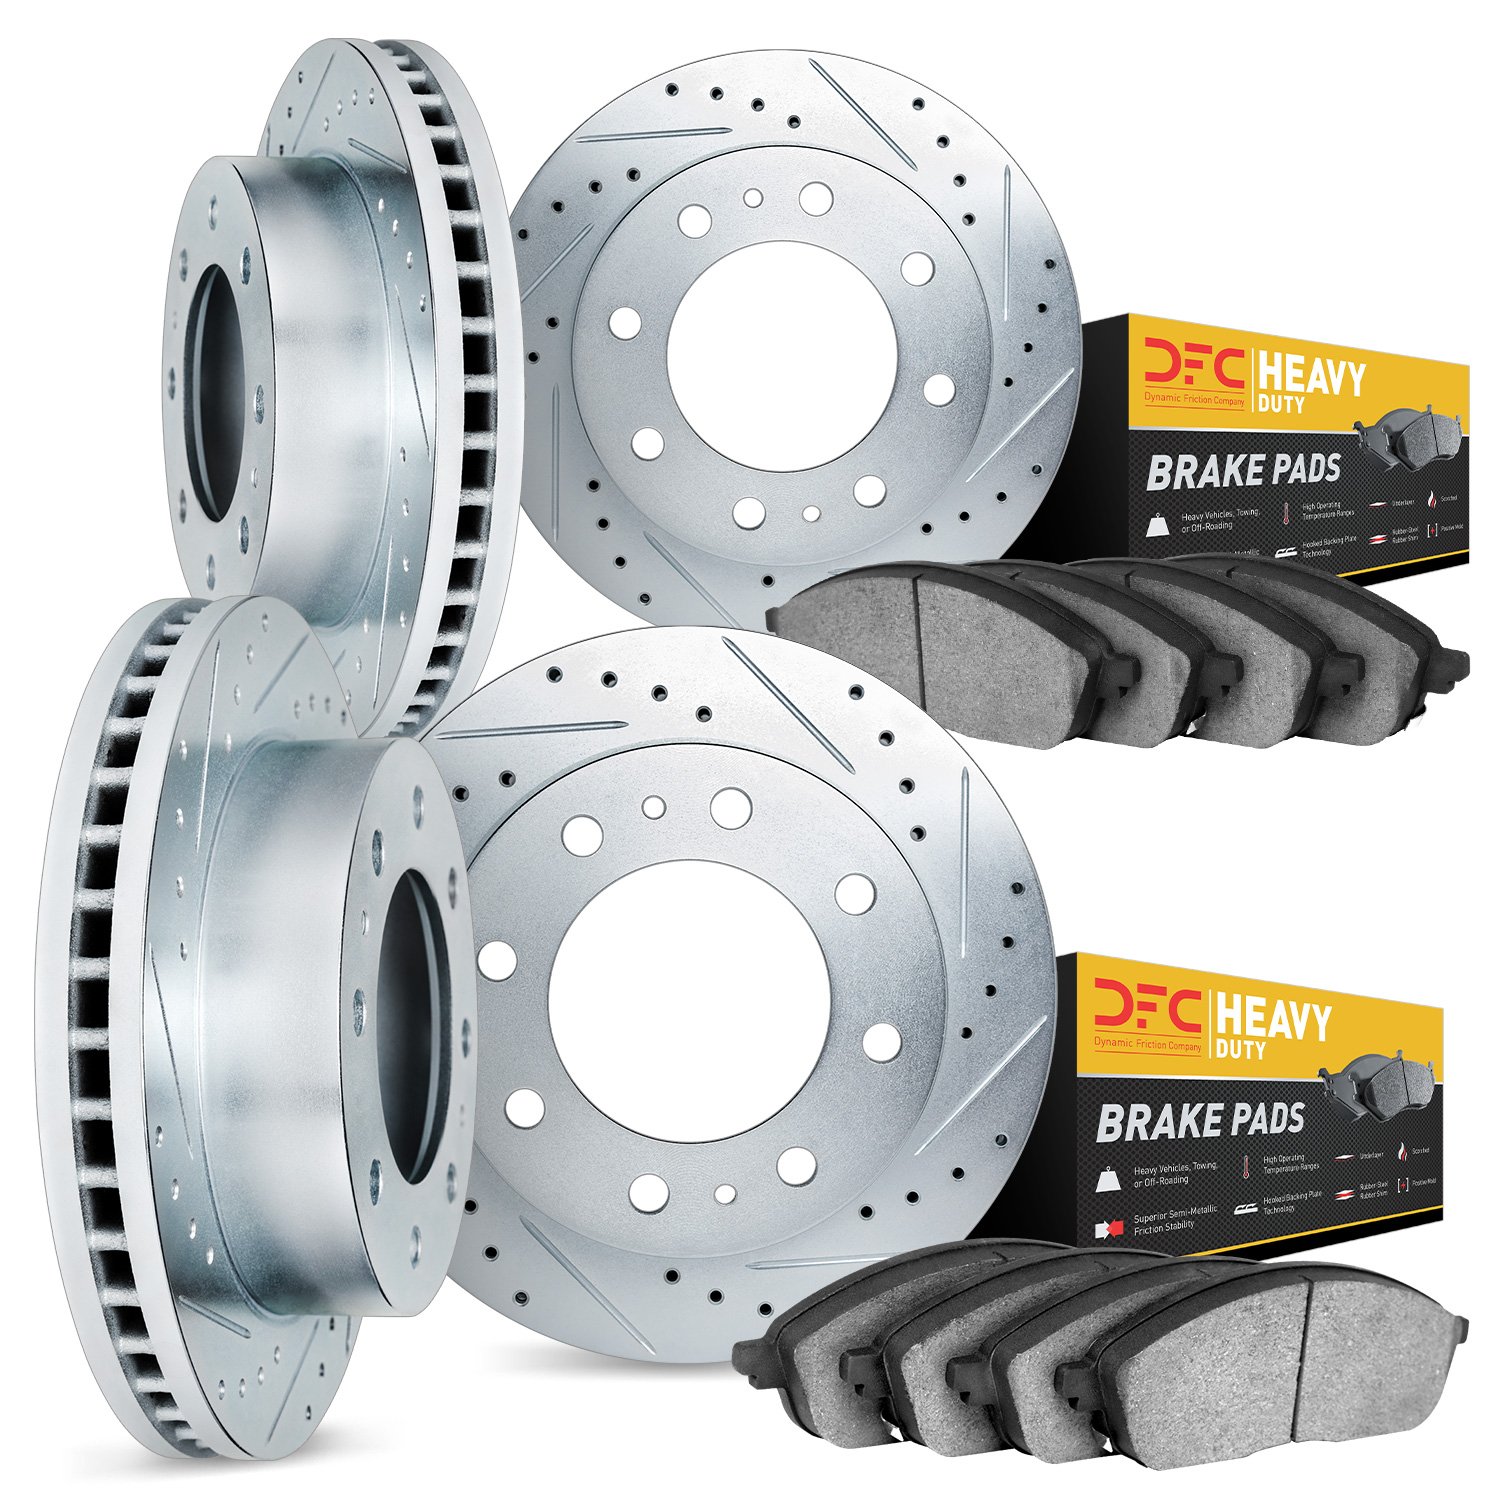 7204-67001 Drilled/Slotted Rotors w/Heavy-Duty Brake Pads Kit [Silver], 2012-2021 Infiniti/Nissan, Position: Front and Rear